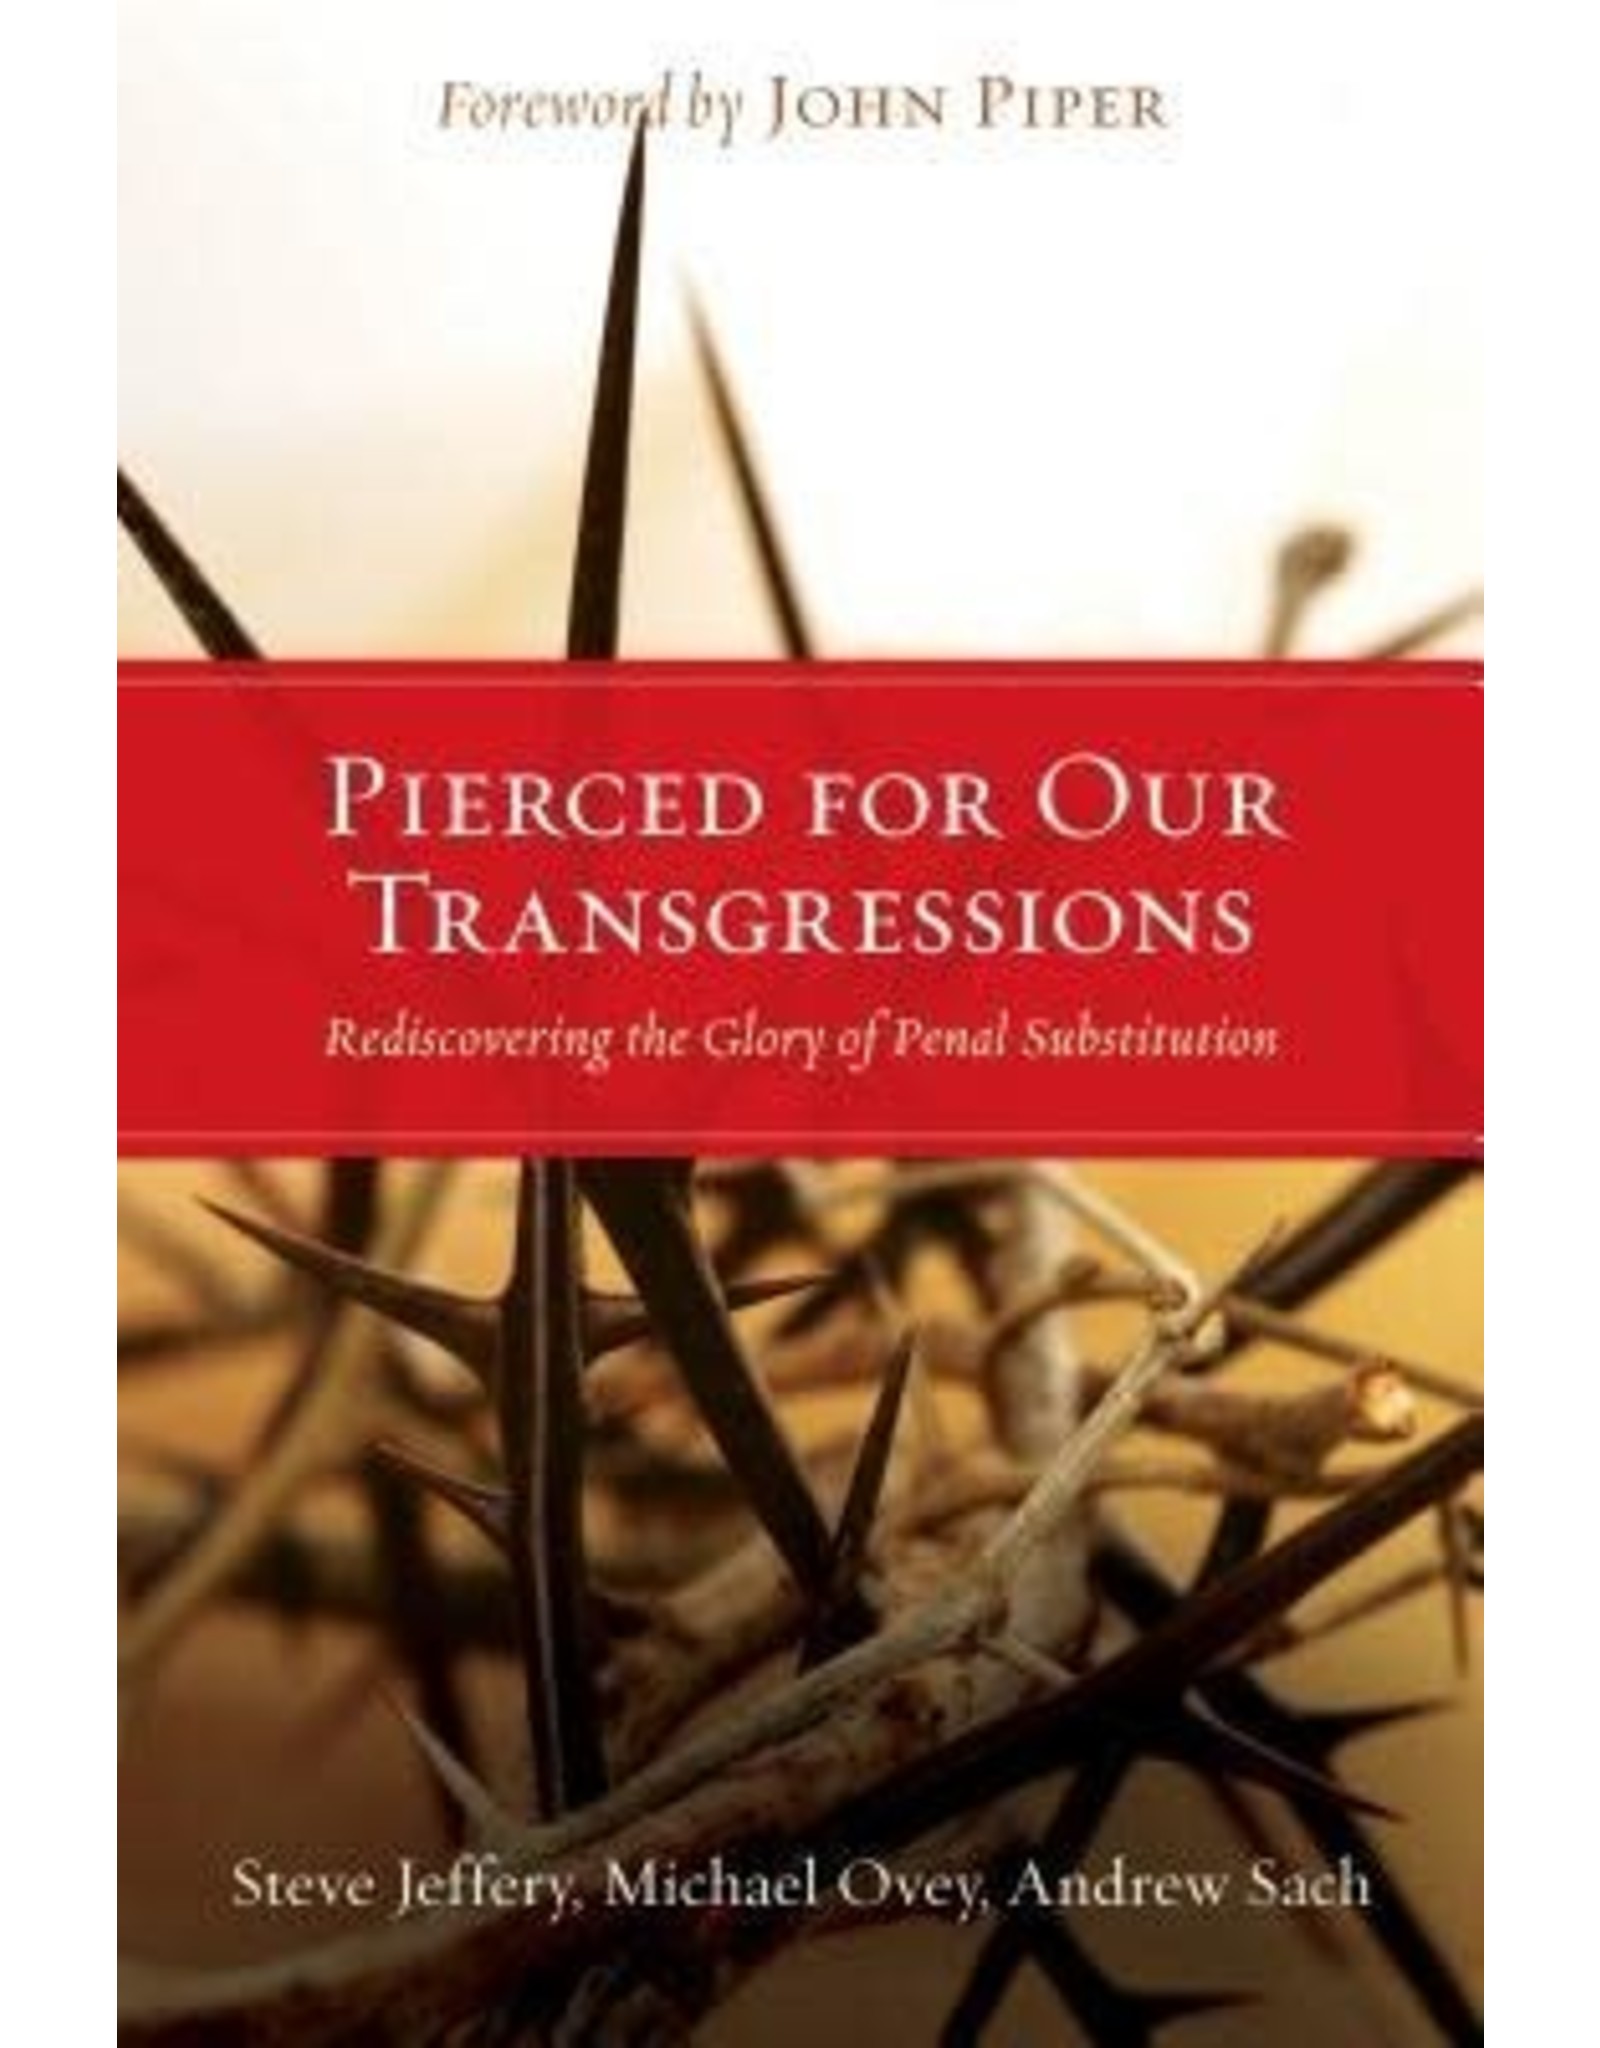 Steve Jeffery & Michael Ovey & Andrew Sach Pierced For Our Transgressions